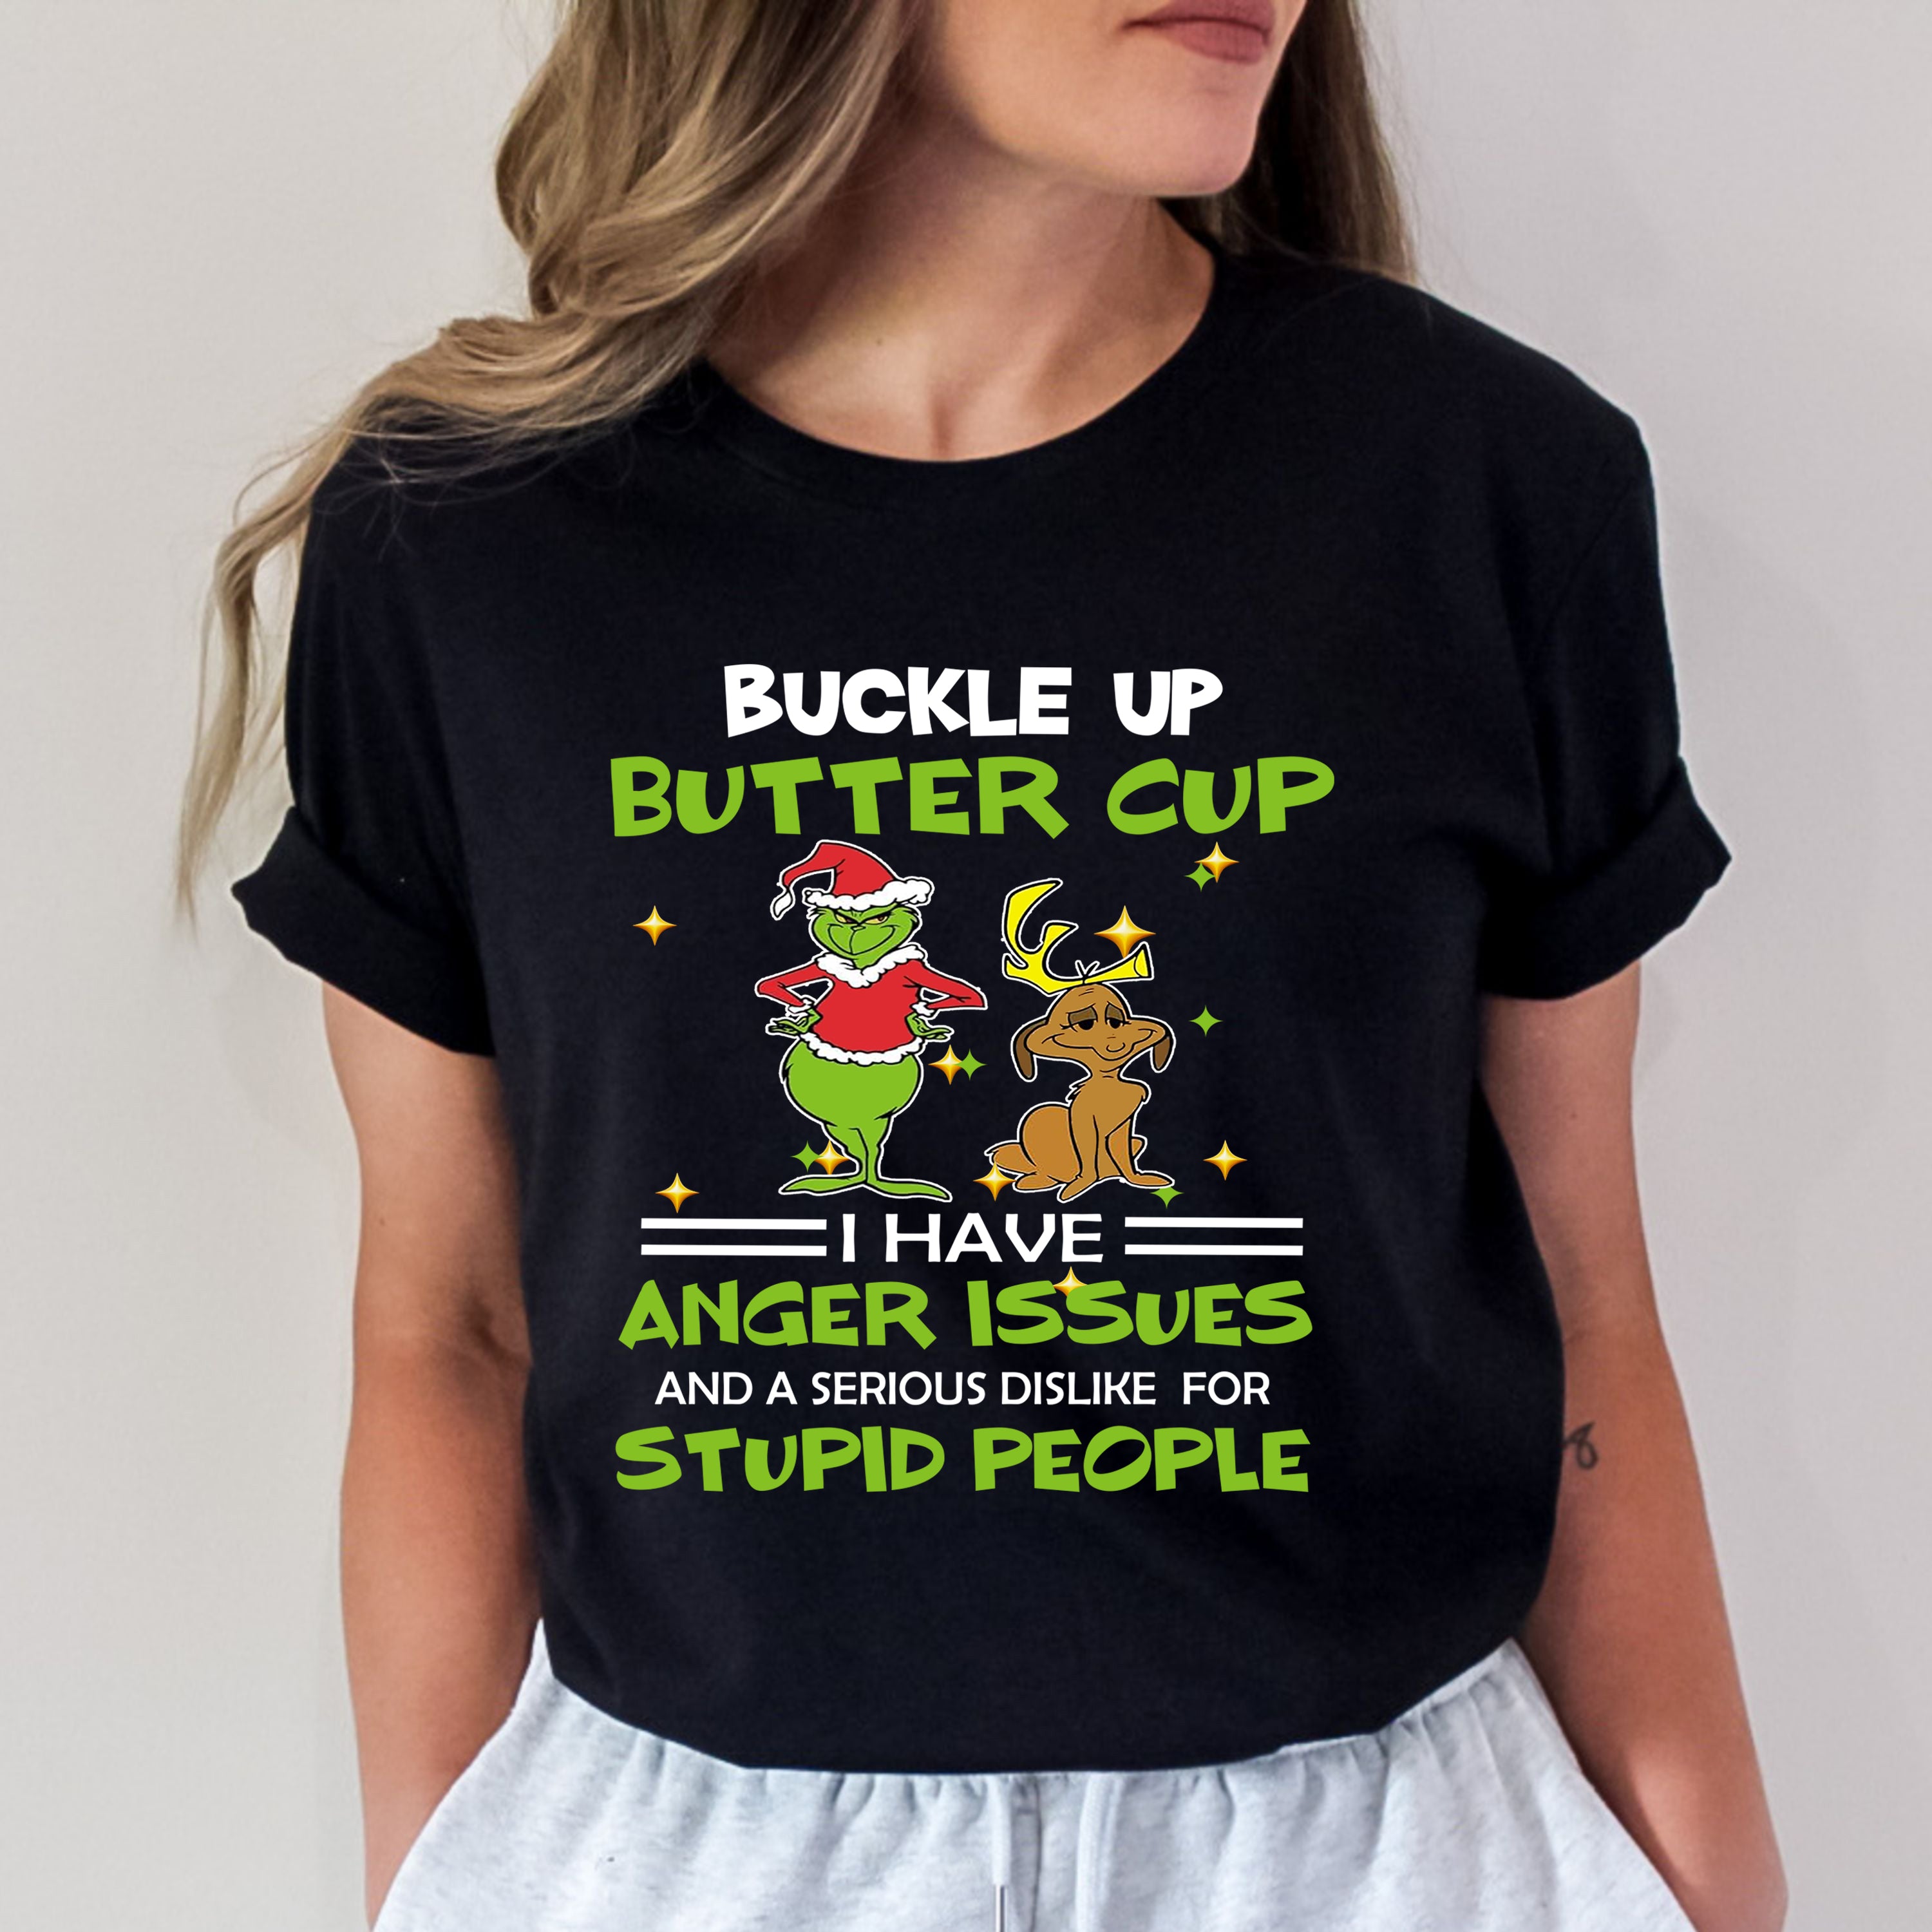 Buckle Up Butter Cup - Bella Canvas